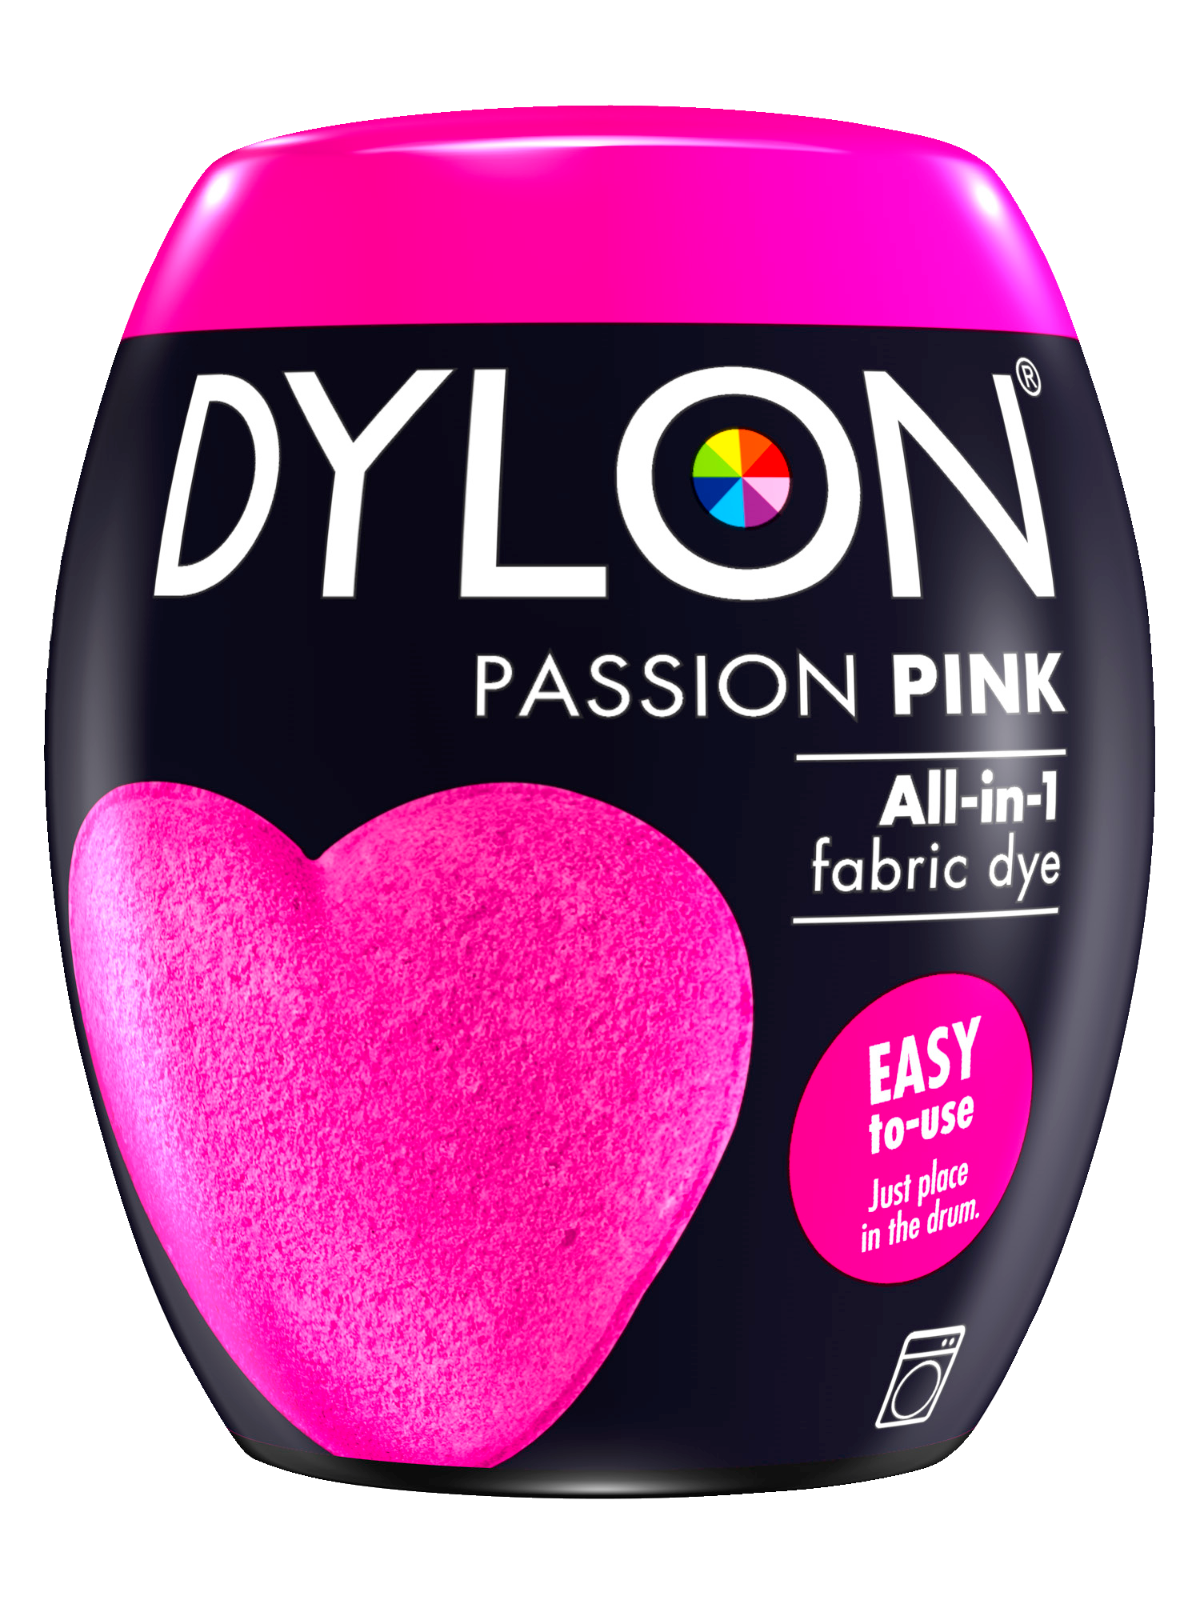 Passion Pink Dylon Dye from Pearls in Acton London